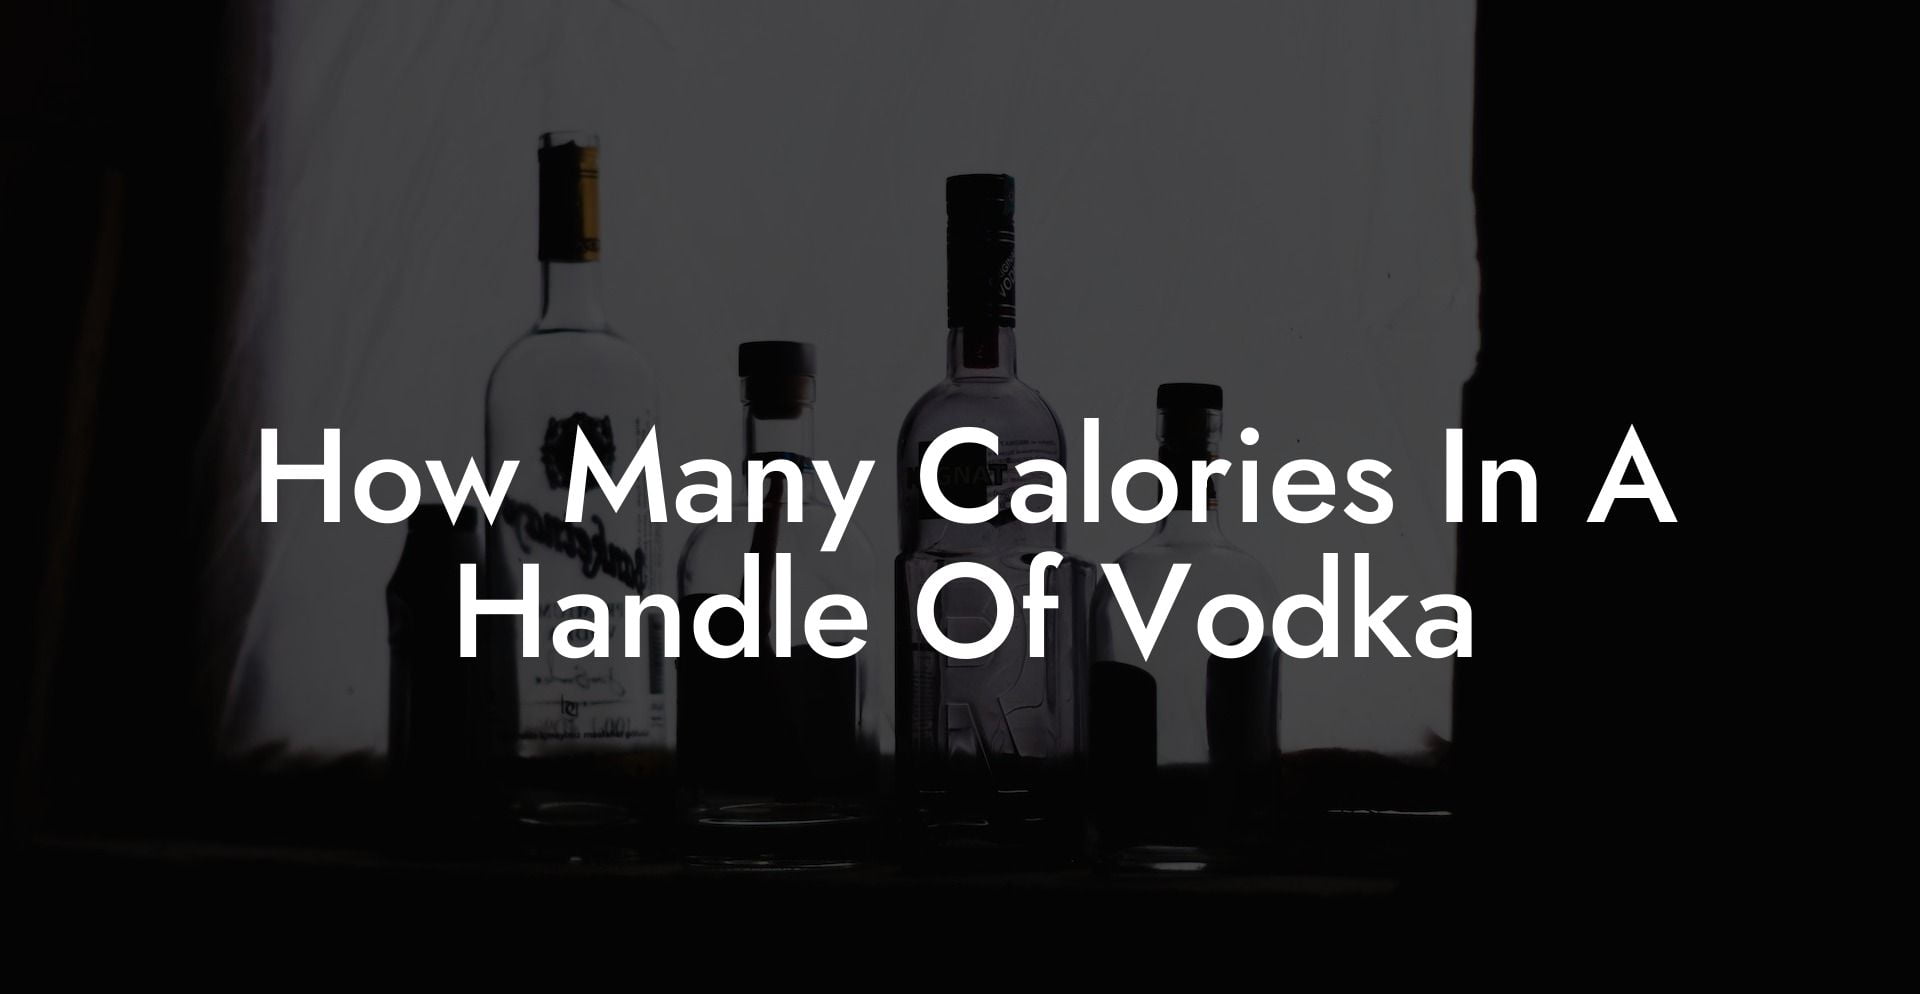 How Many Calories In A Handle Of Vodka